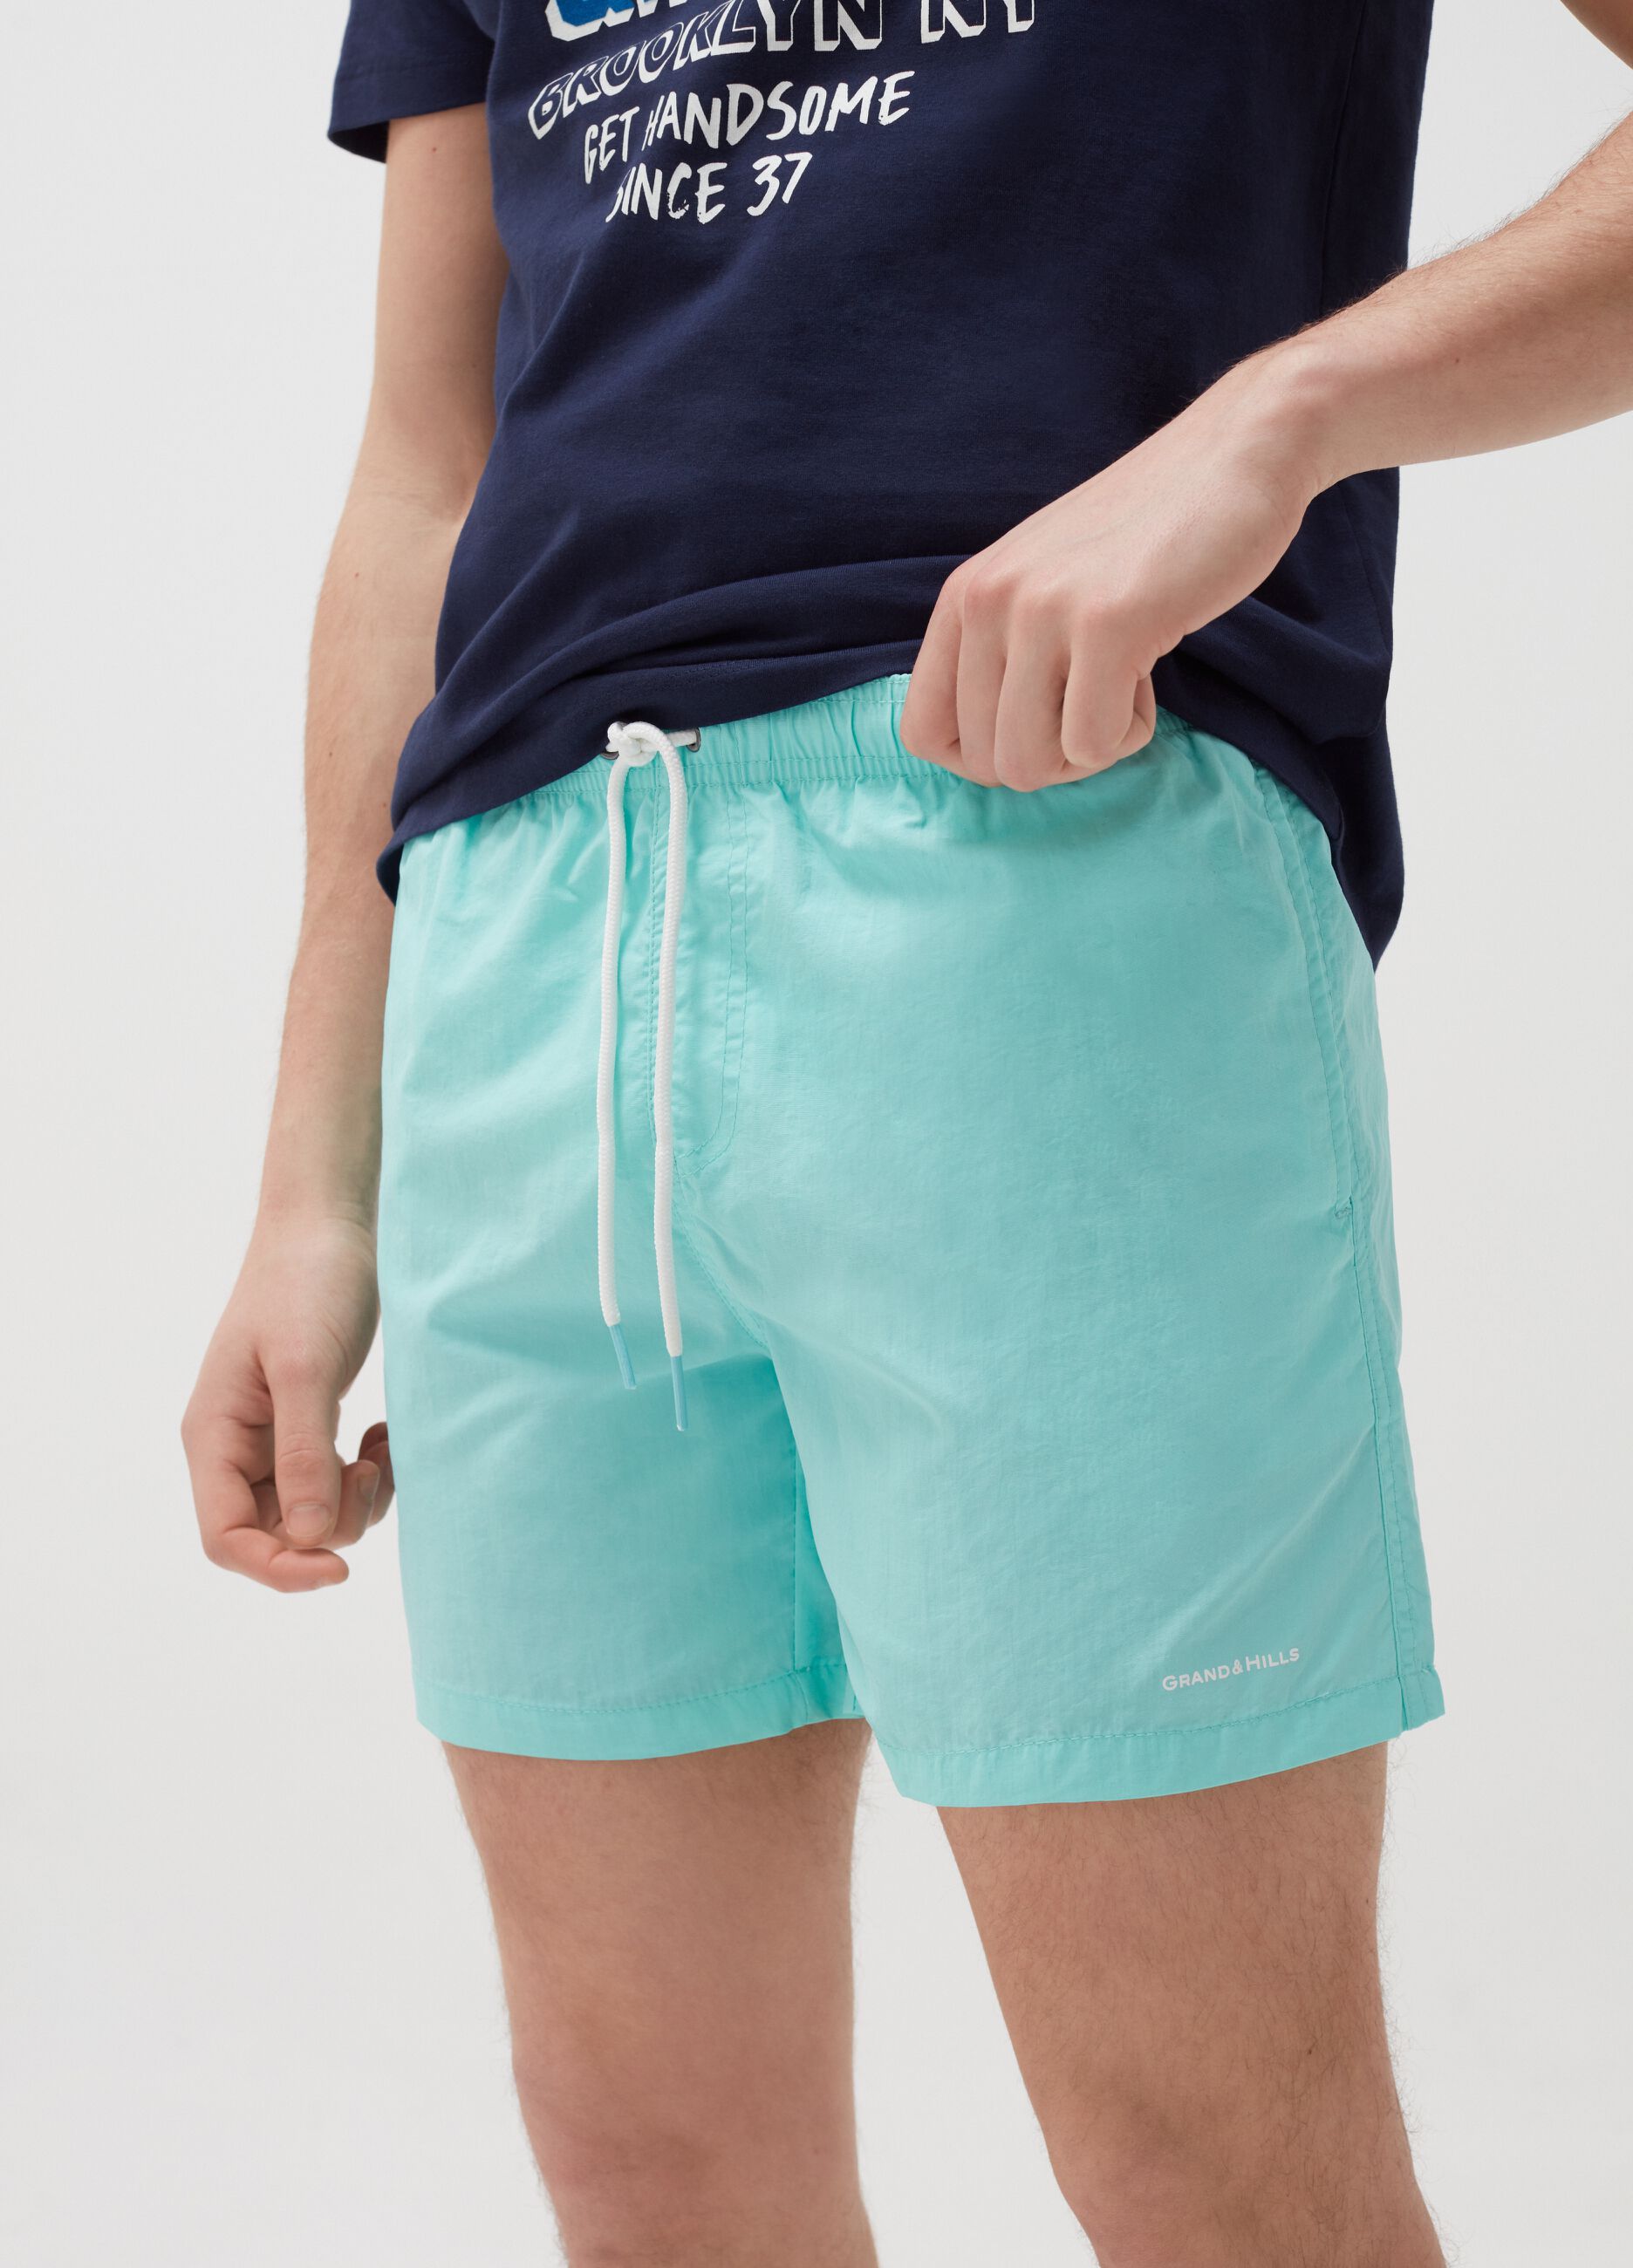 Swimming trunks with lettering print